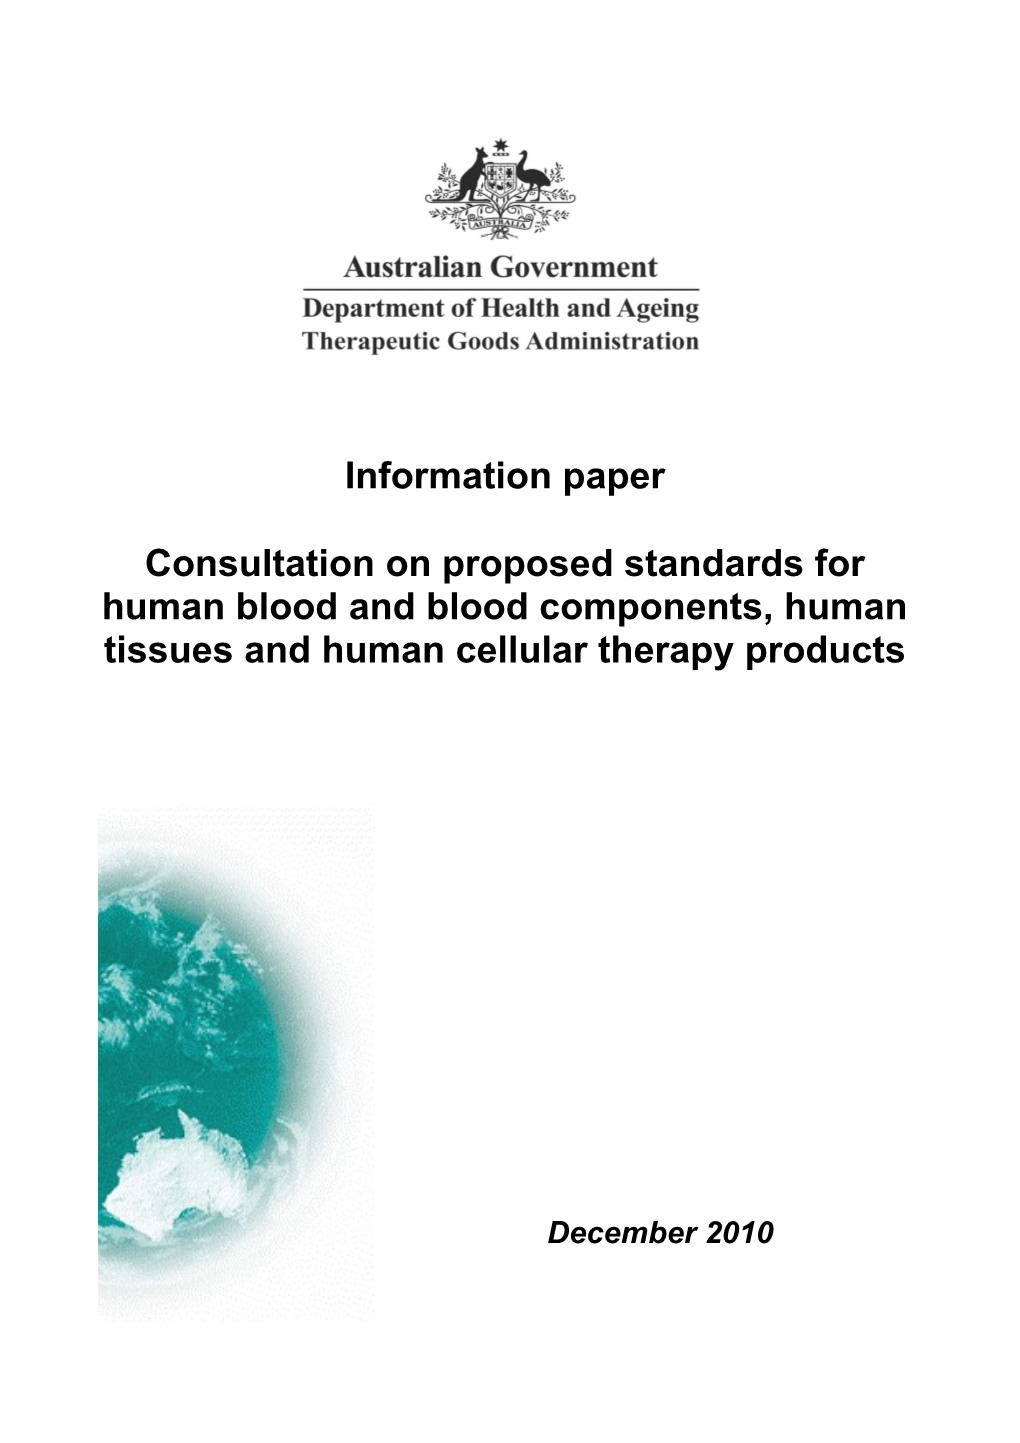 Information Paper: Australian Code of Good Manufacturing Practice Human Blood and Blood